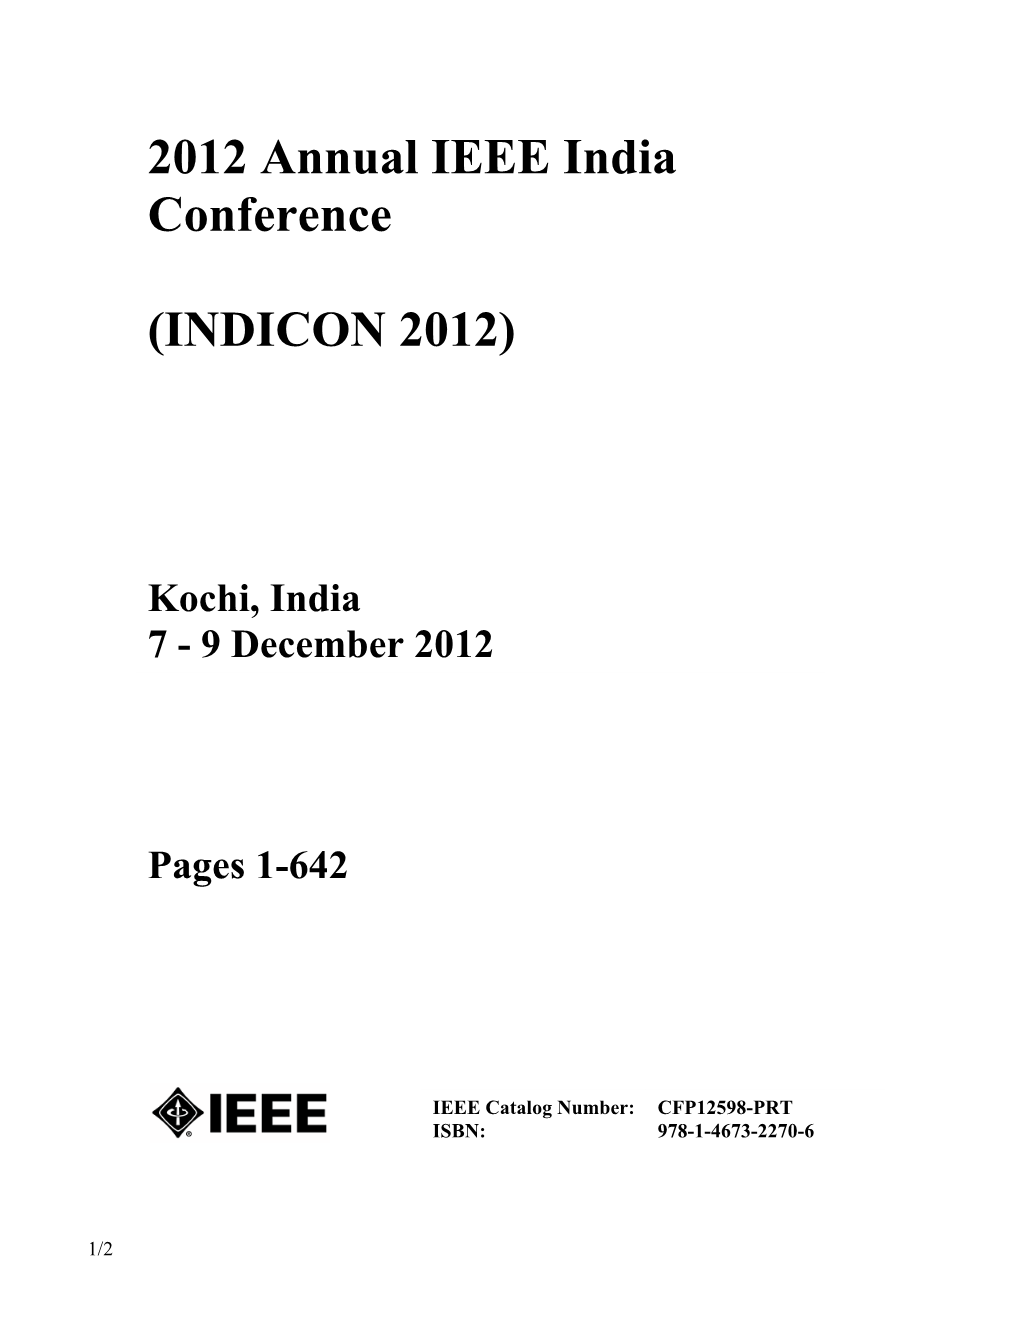 2012 Annual IEEE India Conference (INDICON 2012)